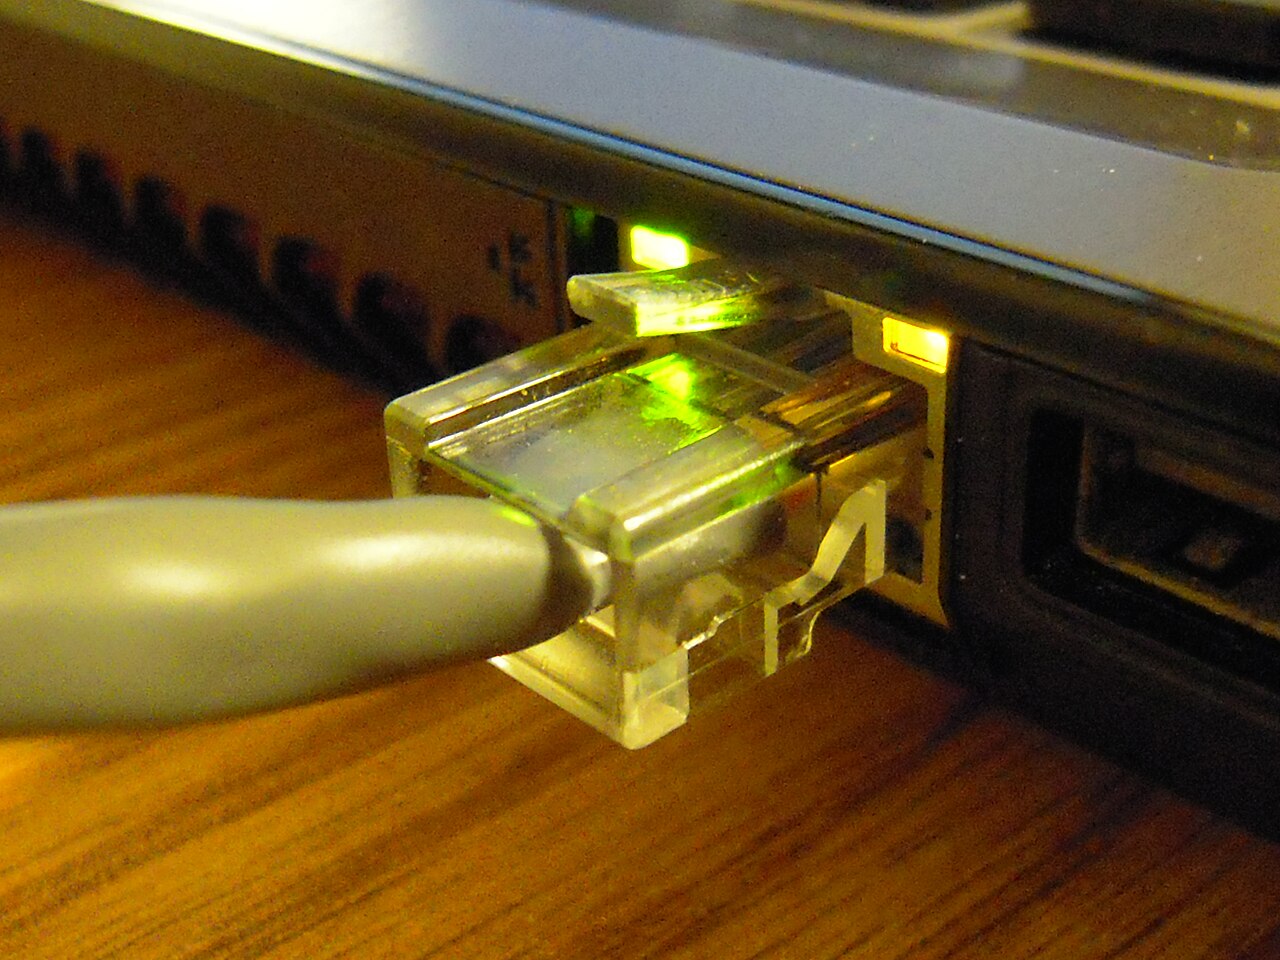 Image of a yellow Ethernet cable plugged into a laptop.